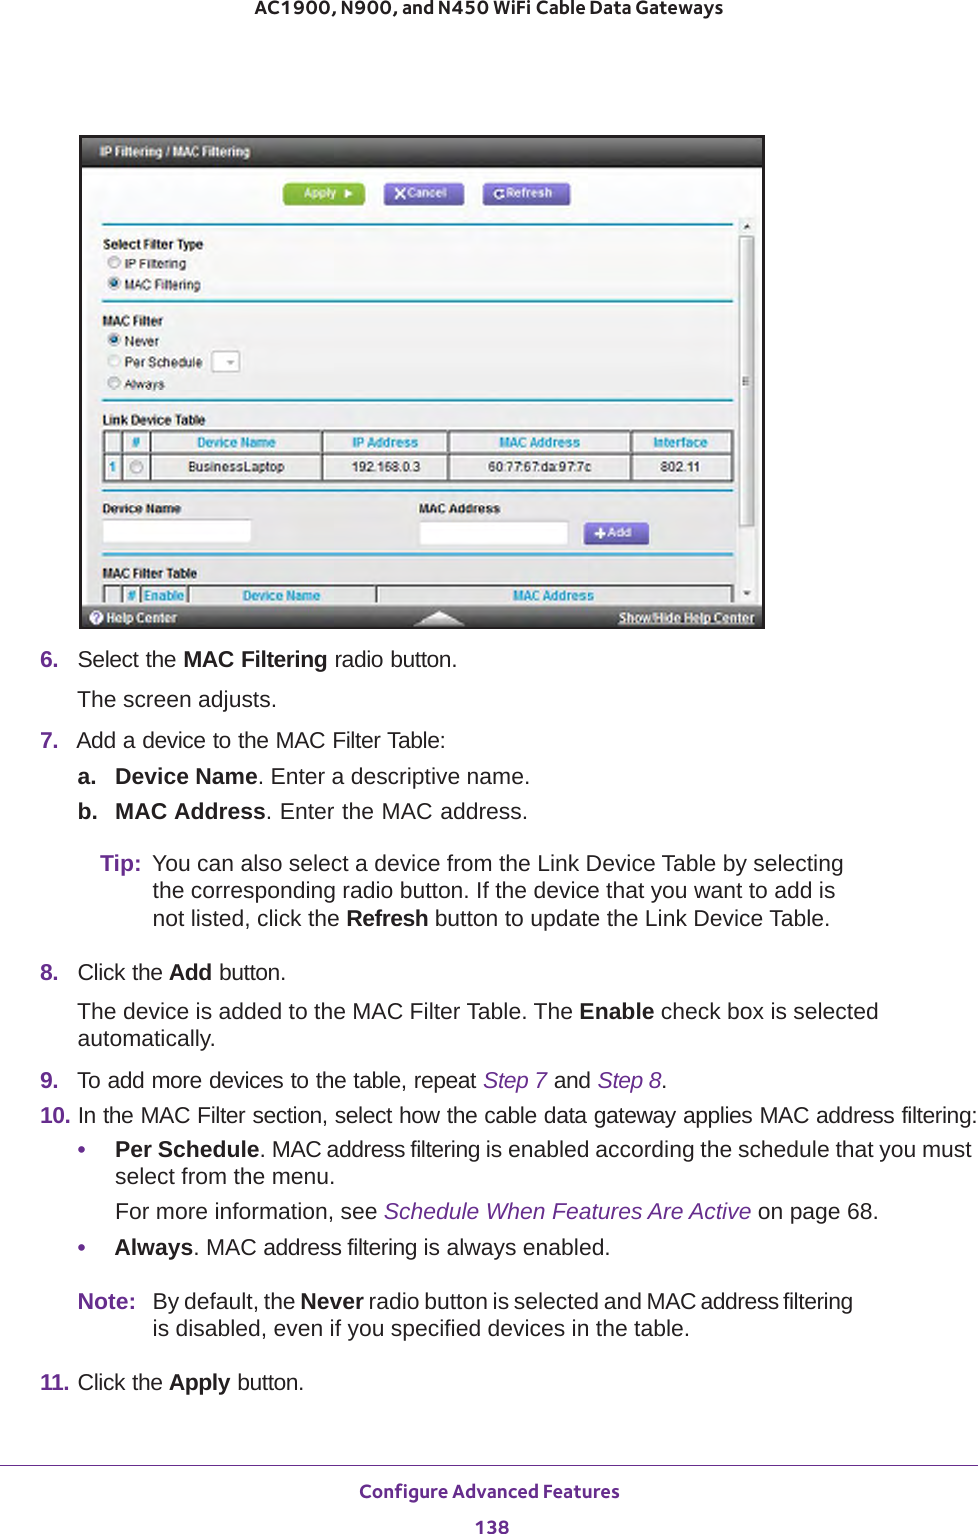 Configure Advanced Features 138AC1900, N900, and N450 WiFi Cable Data Gateways 6.  Select the MAC Filtering radio button.The screen adjusts.7.  Add a device to the MAC Filter Table:a. Device Name. Enter a descriptive name.b. MAC Address. Enter the MAC address.Tip: You can also select a device from the Link Device Table by selecting the corresponding radio button. If the device that you want to add is not listed, click the Refresh button to update the Link Device Table.8.  Click the Add button. The device is added to the MAC Filter Table. The Enable check box is selected automatically.9.  To add more devices to the table, repeat Step  7 and Step  8.10. In the MAC Filter section, select how the cable data gateway applies MAC address filtering:•Per Schedule. MAC address filtering is enabled according the schedule that you must select from the menu.For more information, see Schedule When Features Are Active on page  68.•Always. MAC address filtering is always enabled.Note: By default, the Never radio button is selected and MAC address filtering is disabled, even if you specified devices in the table.11. Click the Apply button. 